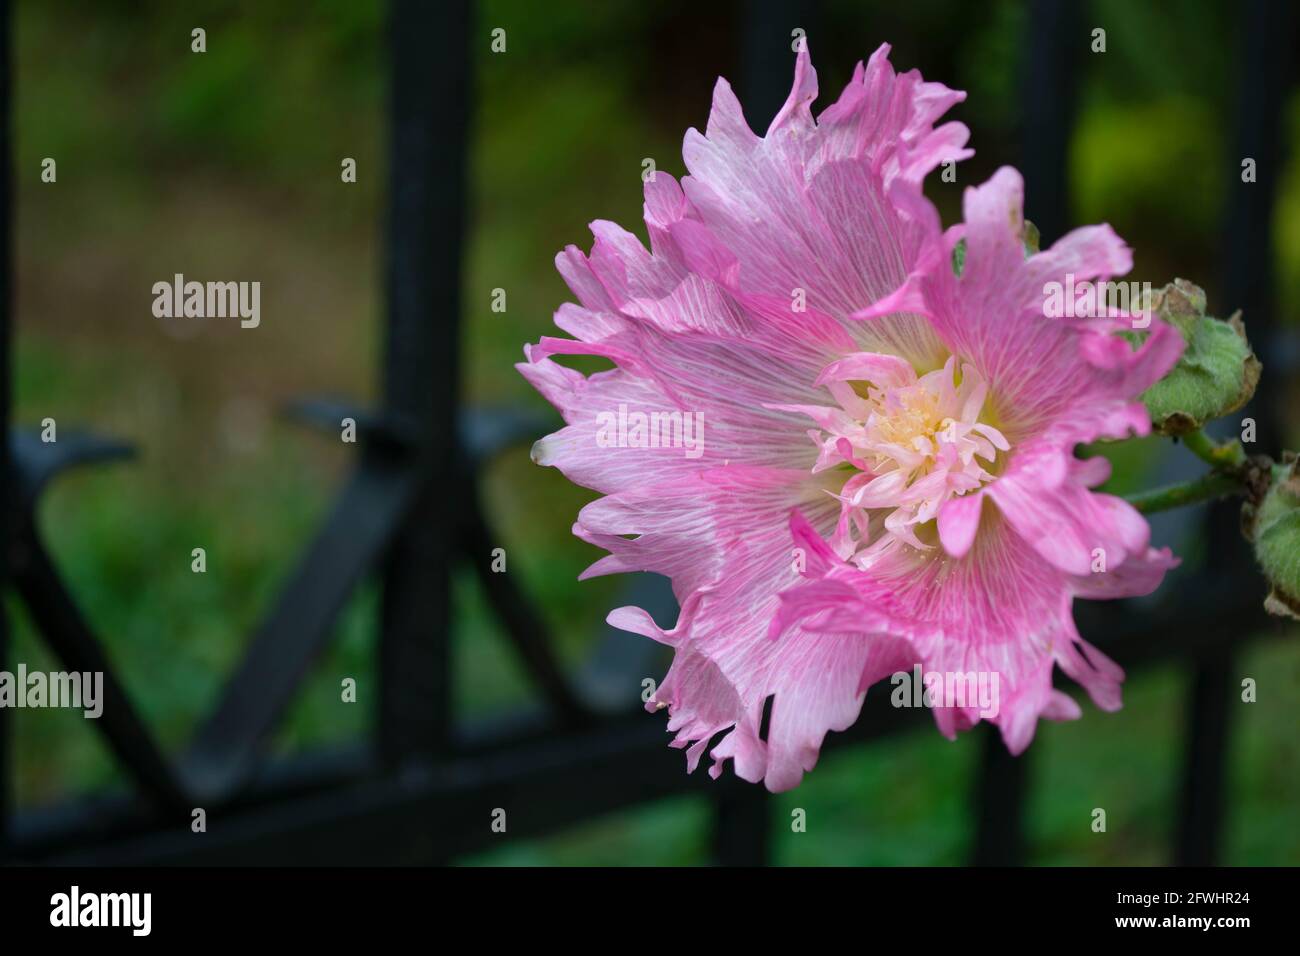 Pink mallow flower against the background of a blurred dark hedge in the garden Stock Photo